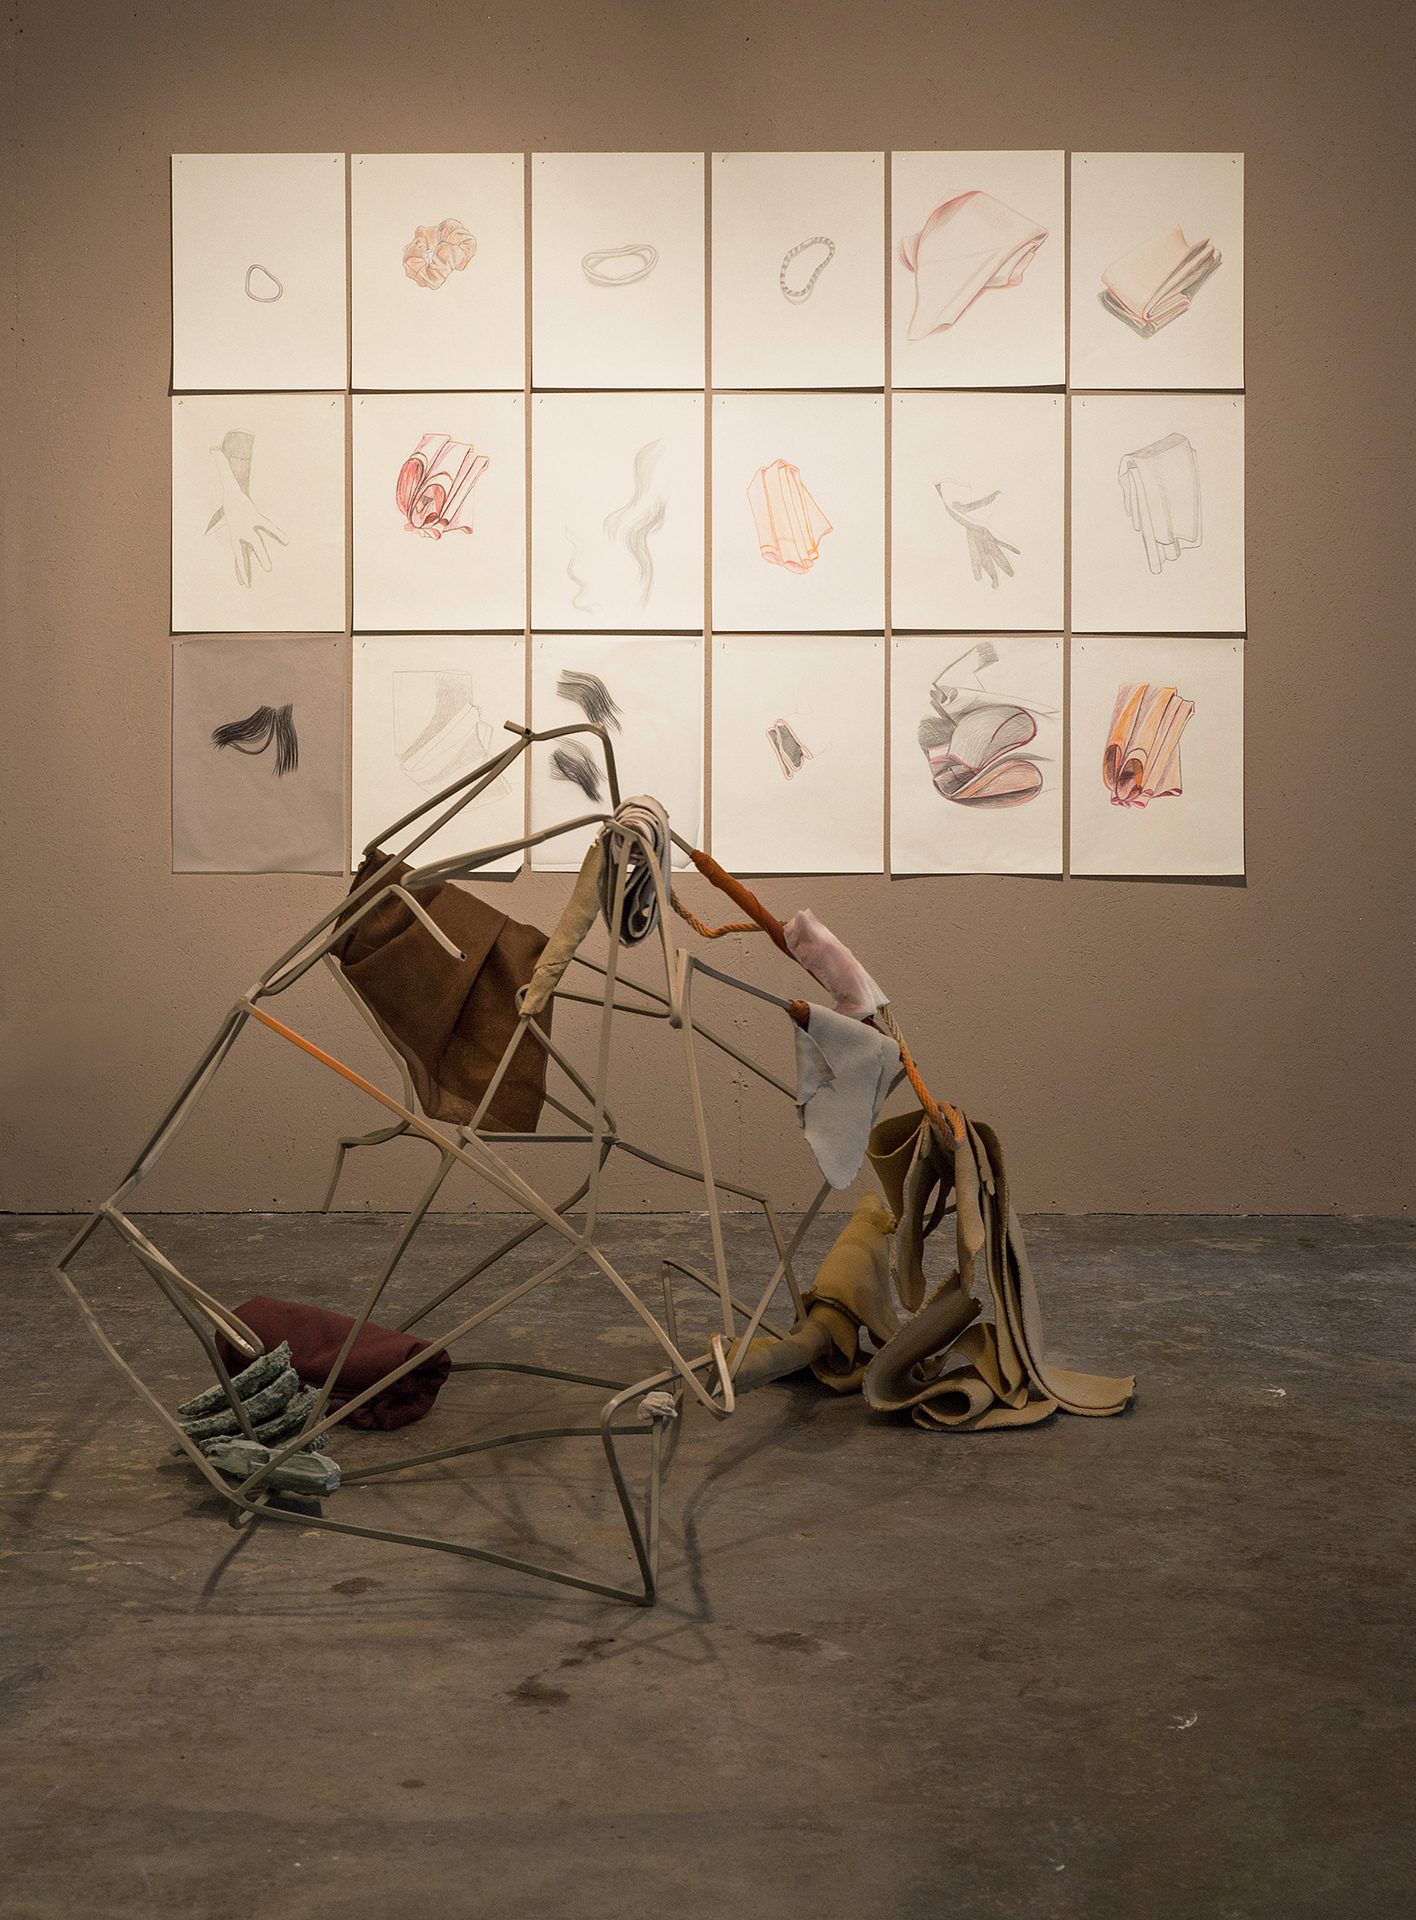 Laura Põld, Downward dog, 2020. Steel, clay, found objects, rope, spray paint. / Laura Põld, In a silent room: On some things that live among us, 2020. Drawings